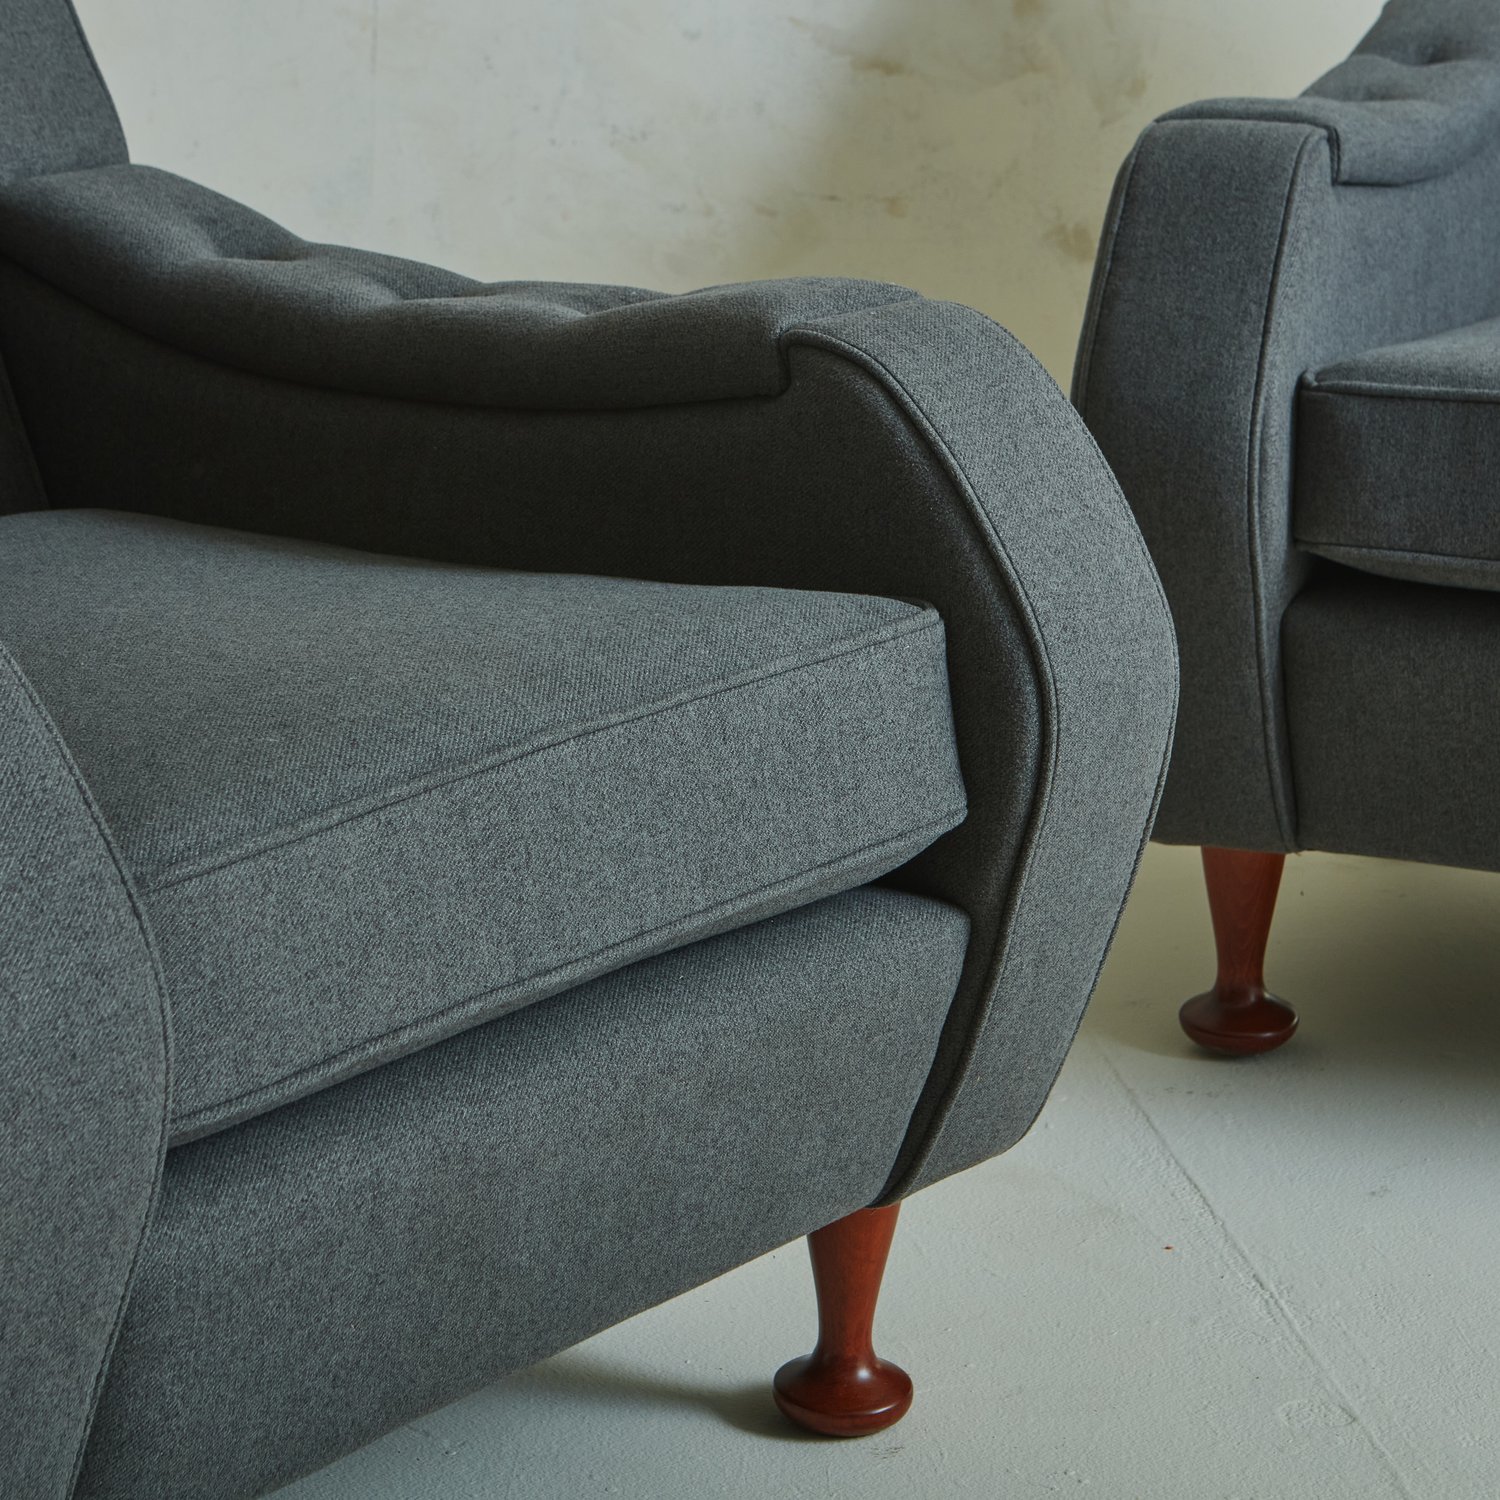 Lounge Loop Chairs of South Mangiarotti, 1970s Wool In in the Pair of Loft Style Gray — Italian Angelo